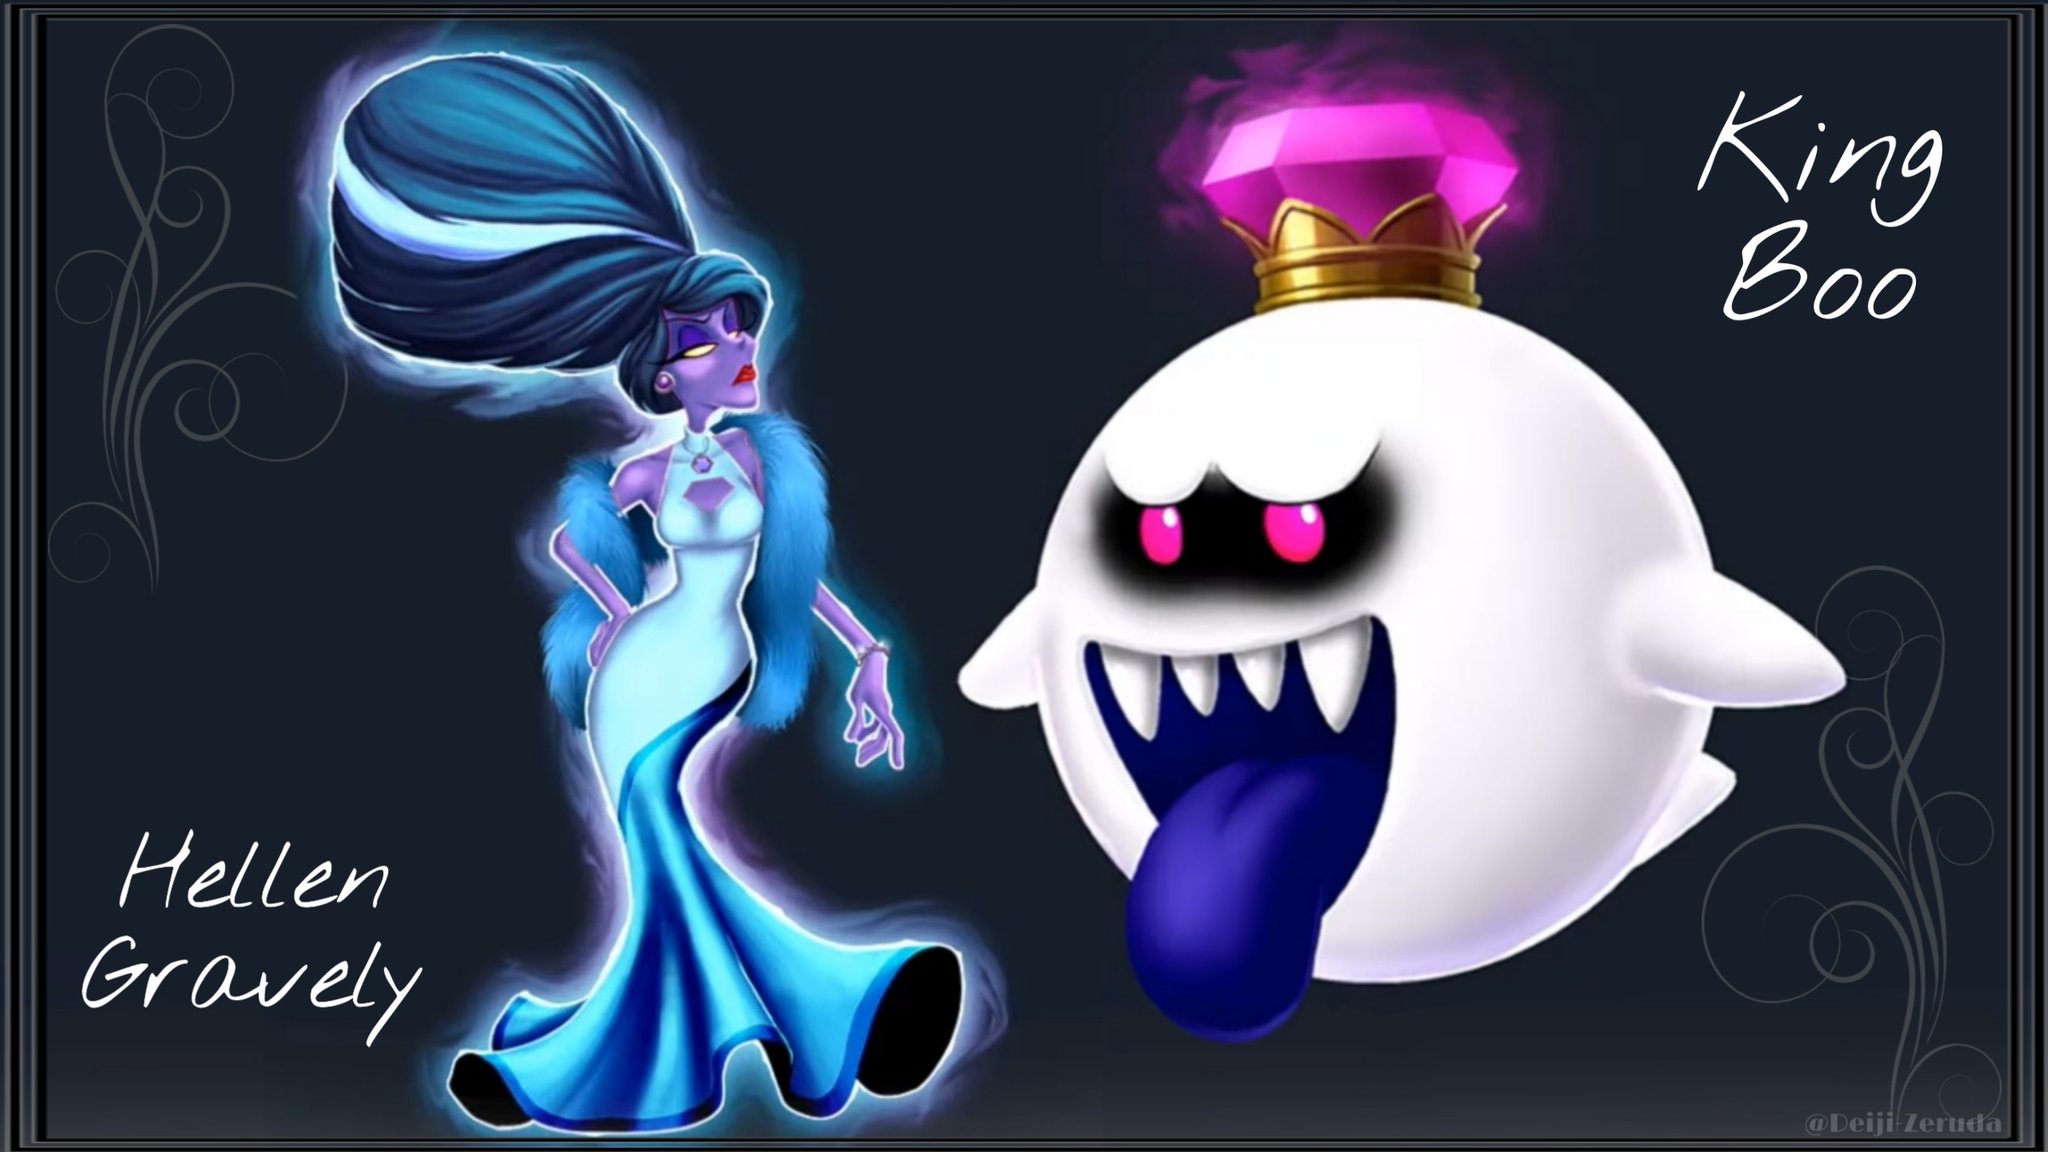 Deiji Zeruda On The Ghostly Duo King Boo And Hellen